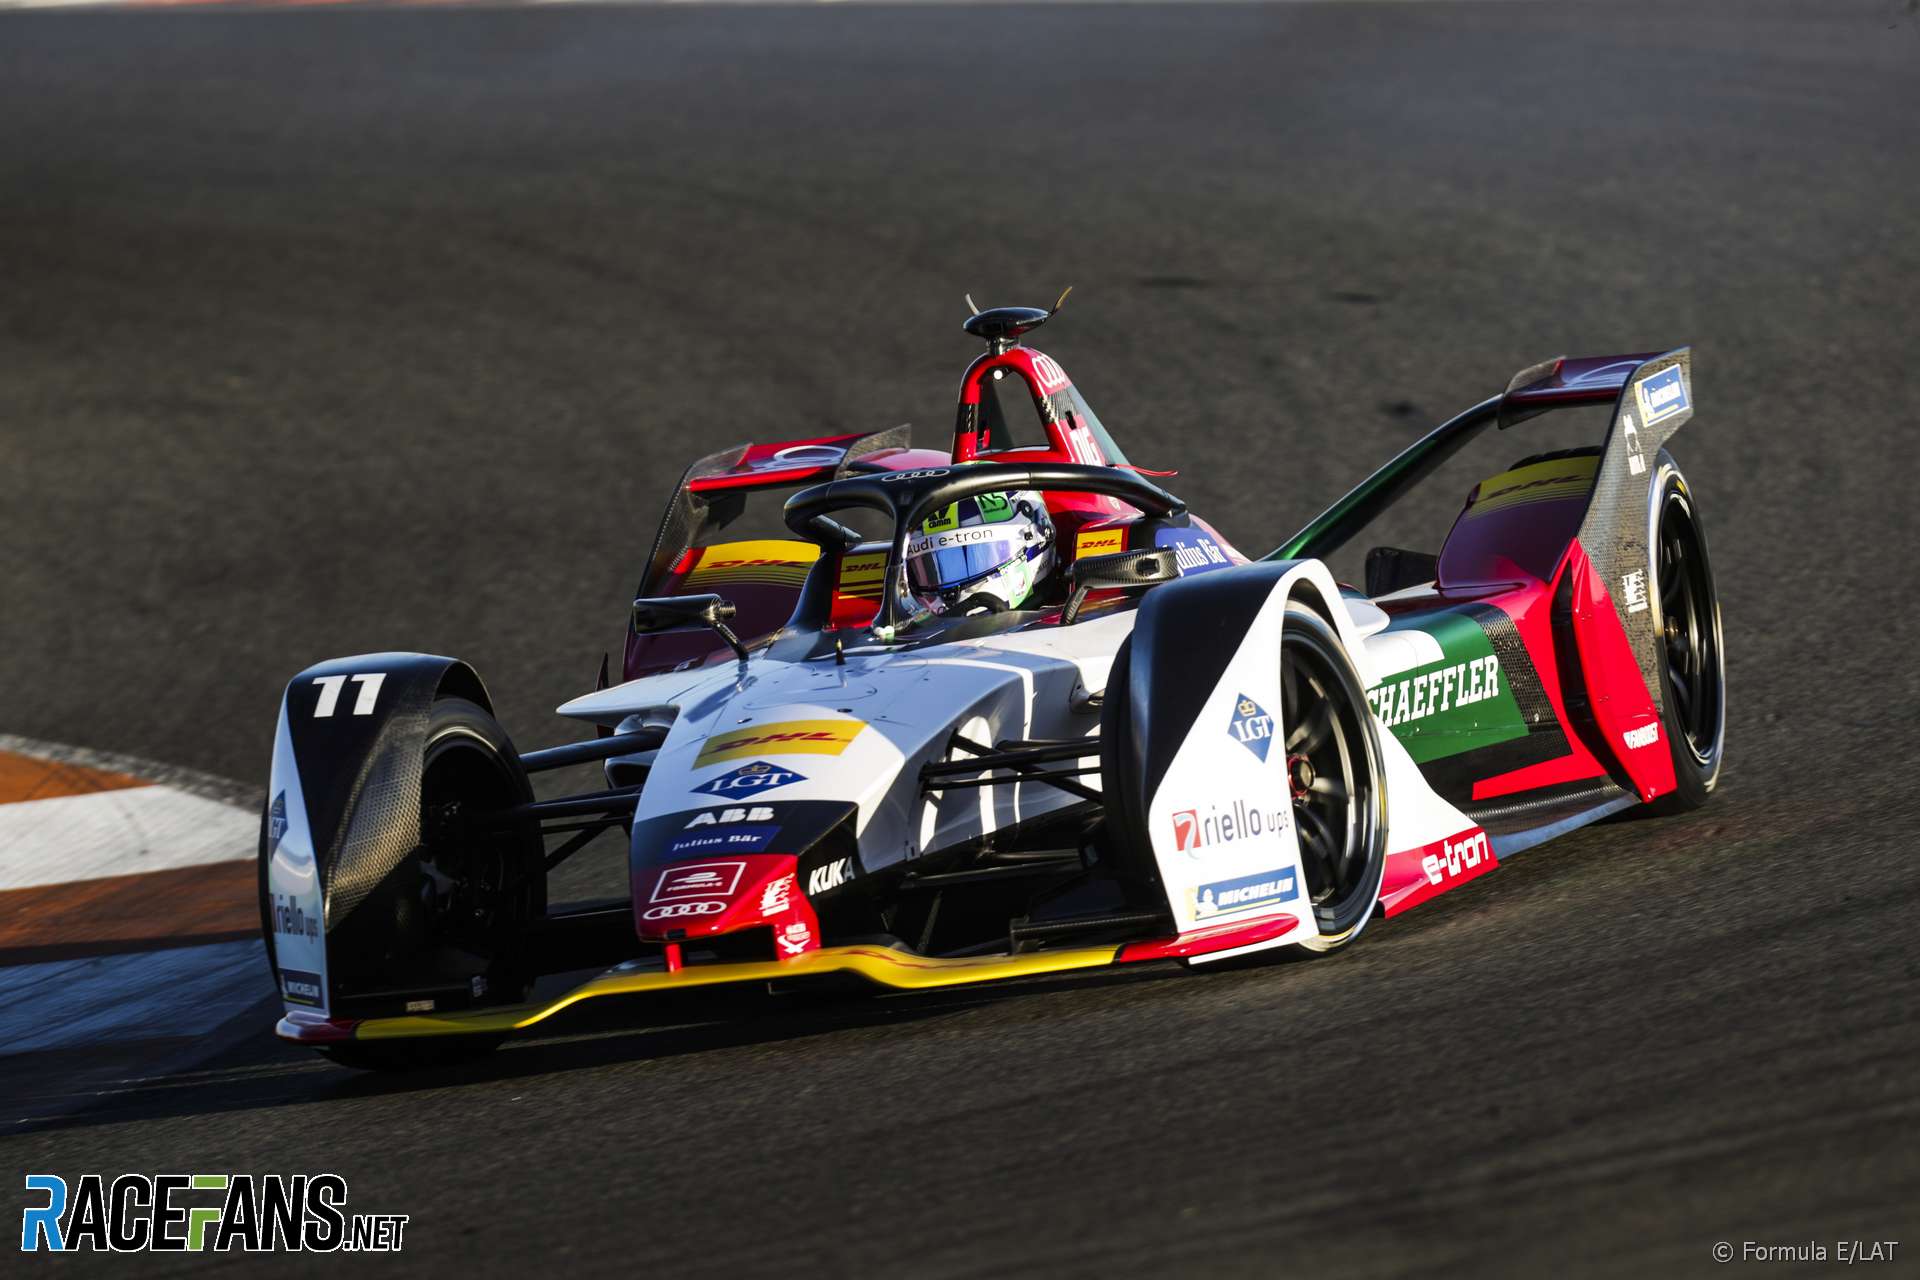 Abt to make immediate return to Formula E after Audi exit 